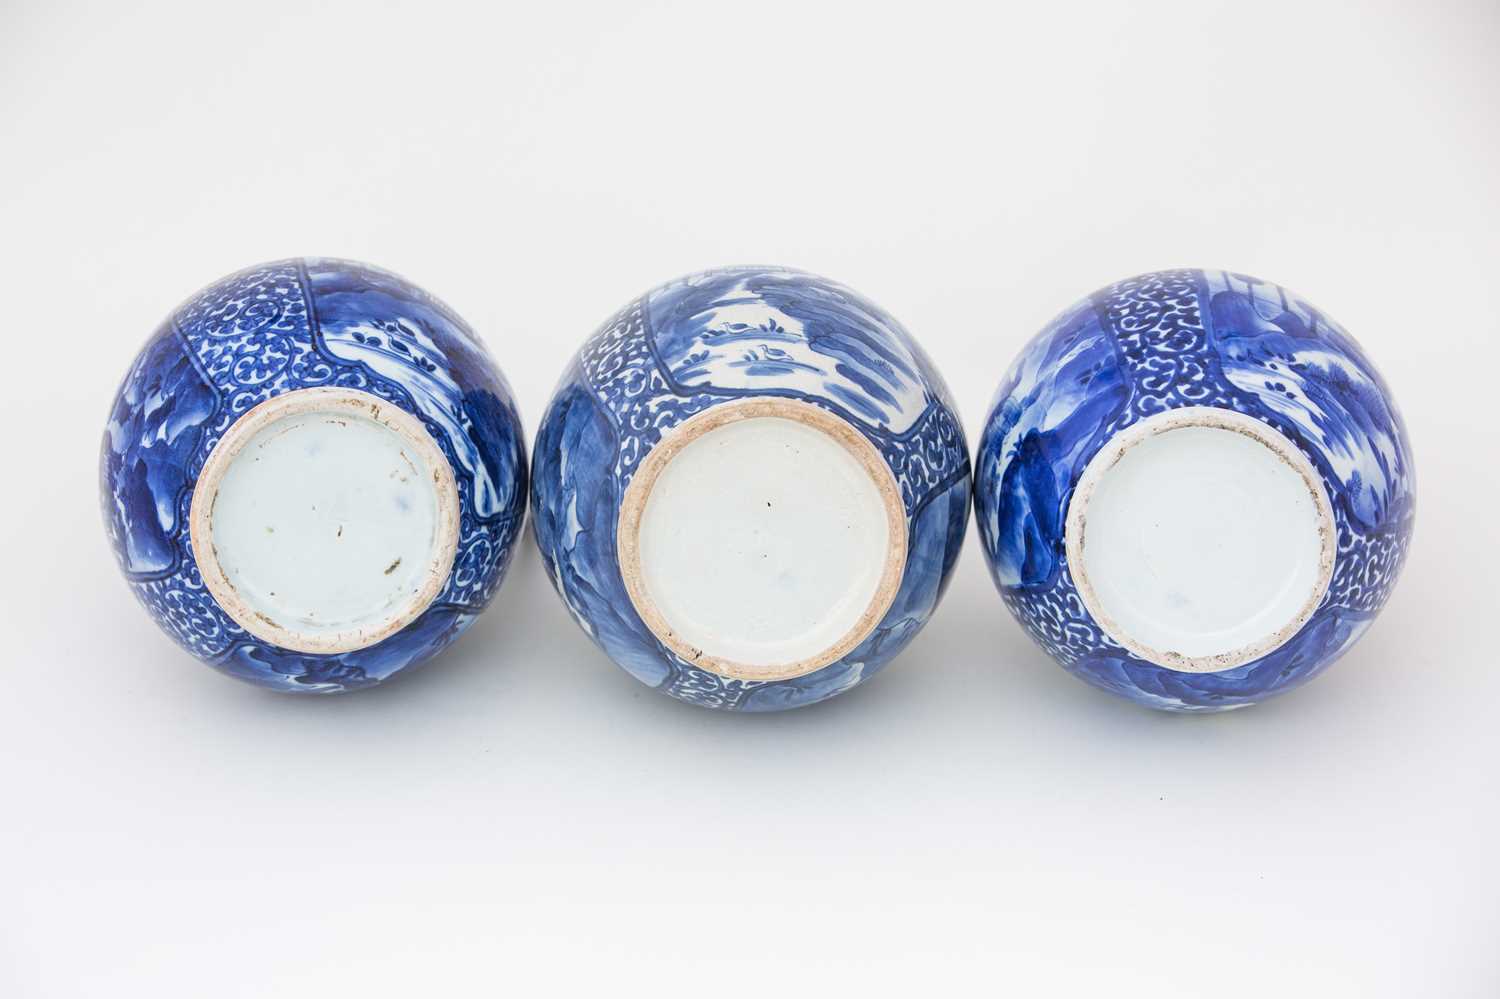 Three Japanese blue & white ewers, circa 1670 -1690, each with oviform body, with cup shape mouth - Image 4 of 4